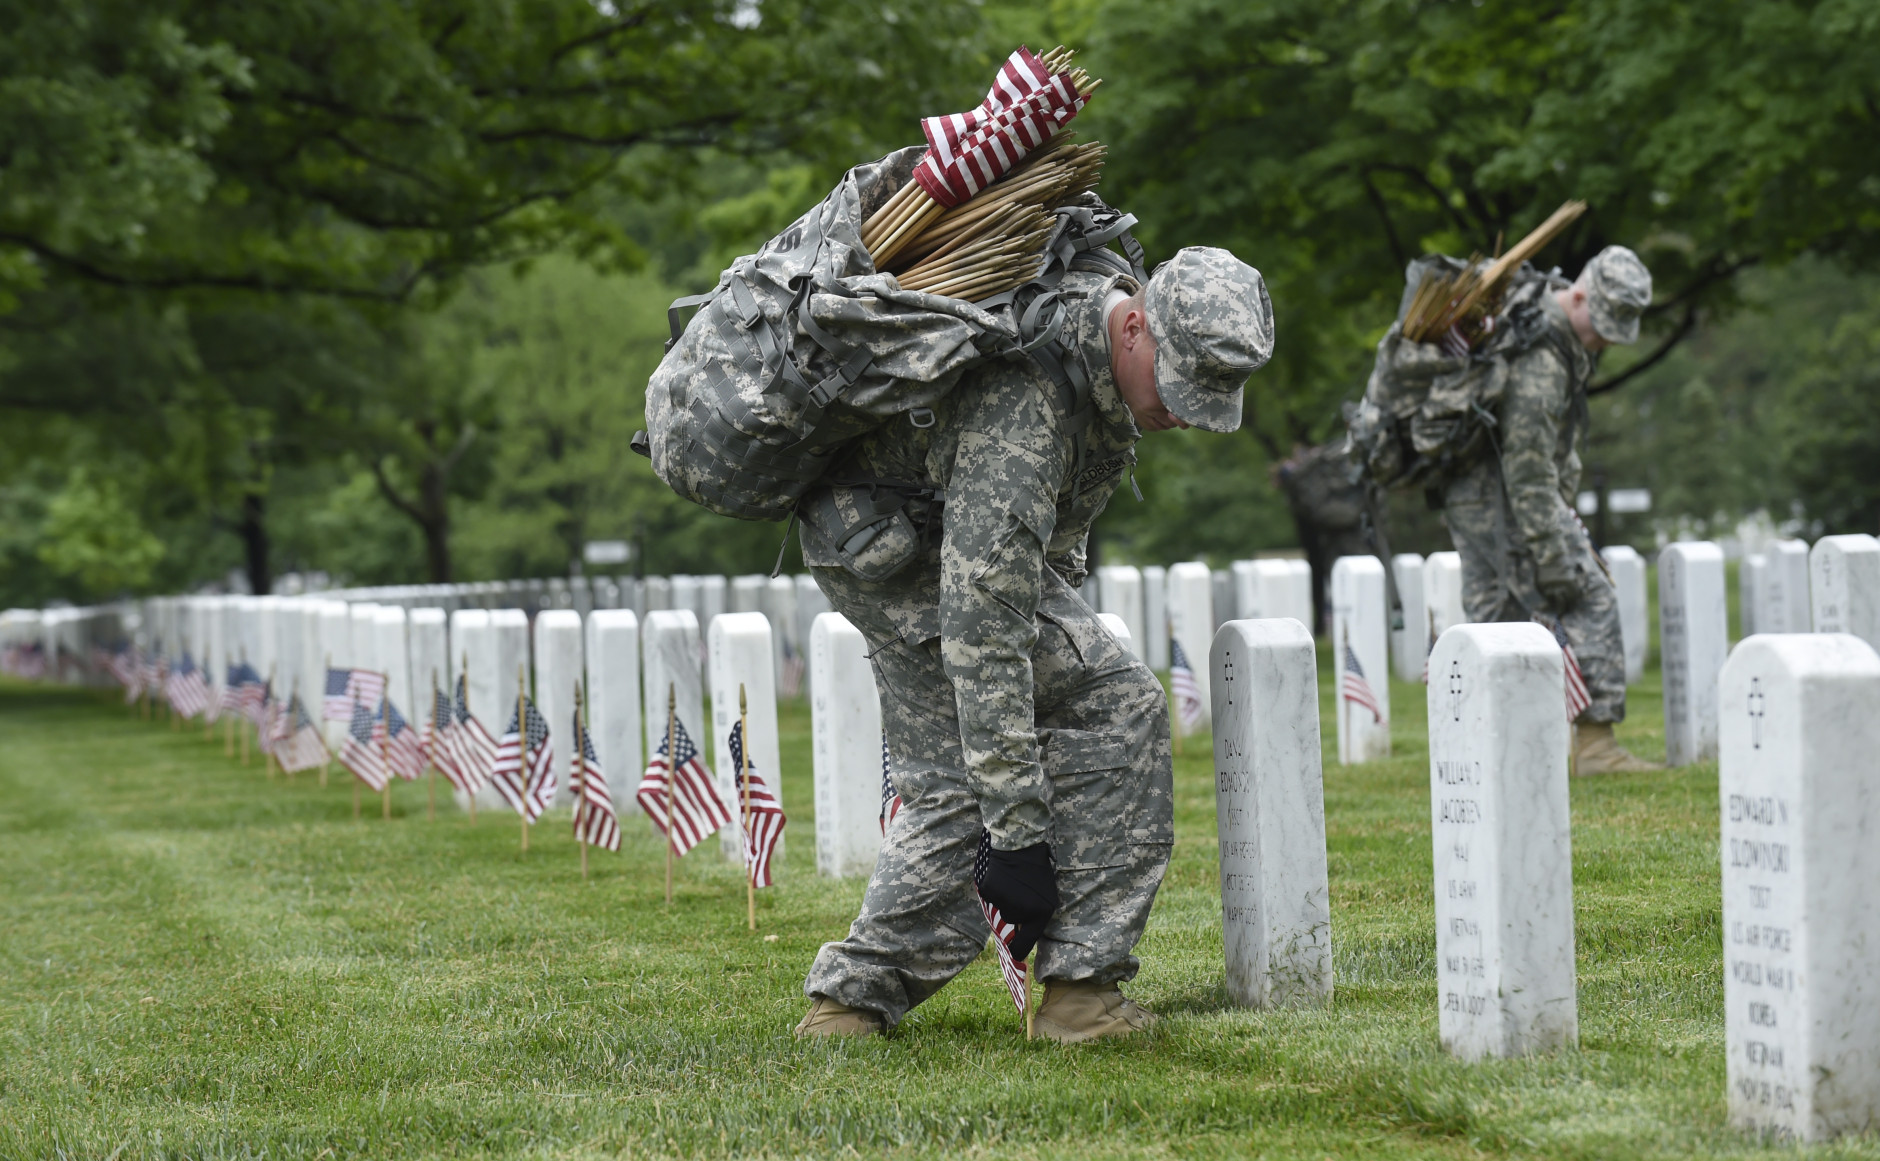 Third U.S. Infantry Regiment (The Old Guard) Pfc. Benjamin Feldbush of Stafford County, Va., places a flag in front of a headstone at Arlington National Cemetery in Arlington, Va., Thursday, May 21, 2015. "Flags In" is an annual tradition that is reserved for The Old Guard since its designation as the Armys official ceremonial unit in 1948. They conduct the mission annually at Arlington National Cemetery and the U.S. Soldiers' and Airmen's Home National Cemetery prior to Memorial Day to honor our nations fallen military heroes. (AP Photo/Susan Walsh)